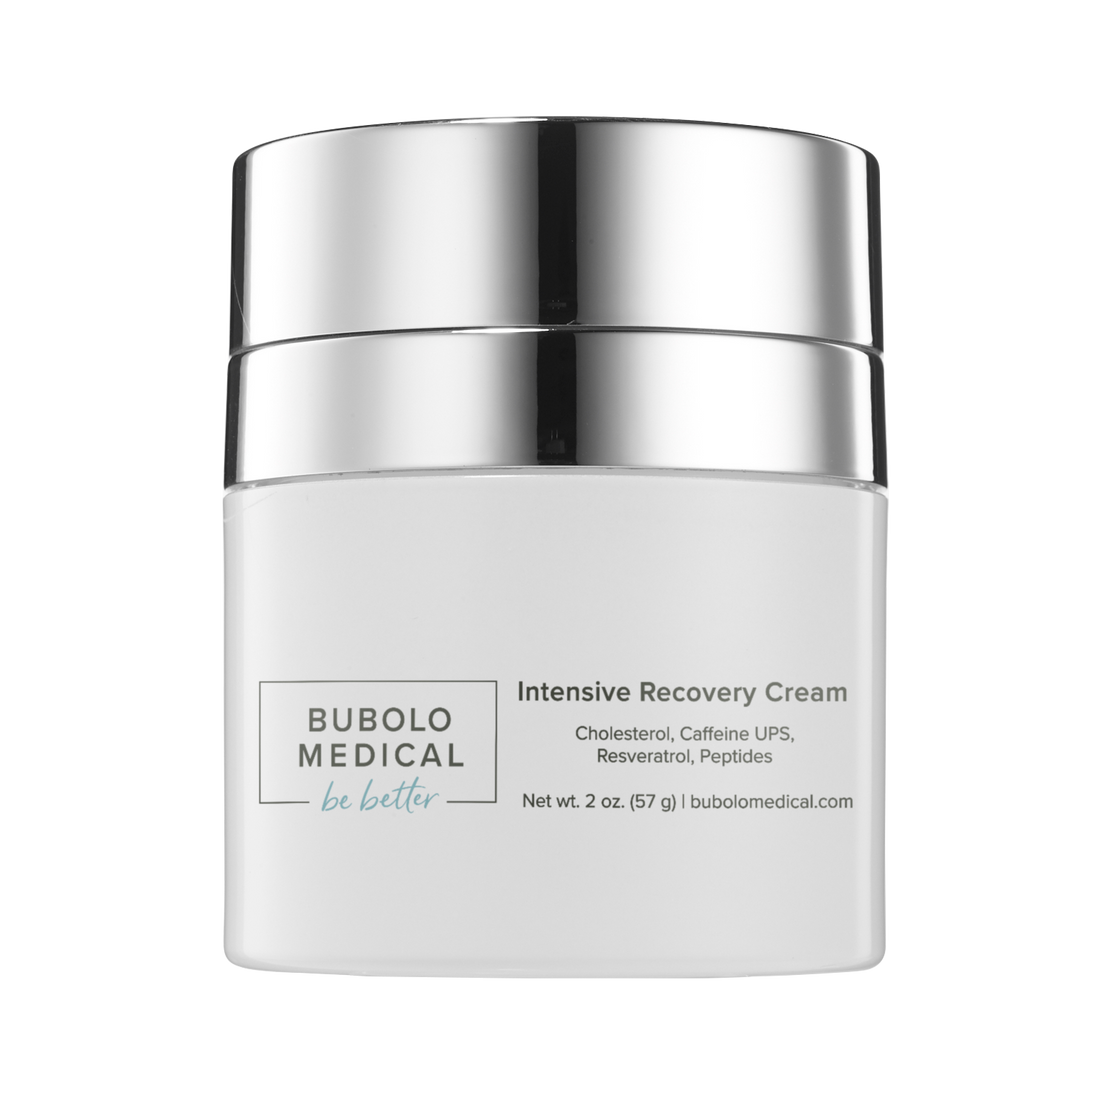 restorative soft cream with squalane, ceramides, and collagen boost technology for hydration and skin barrier repair with caffeine and peptides